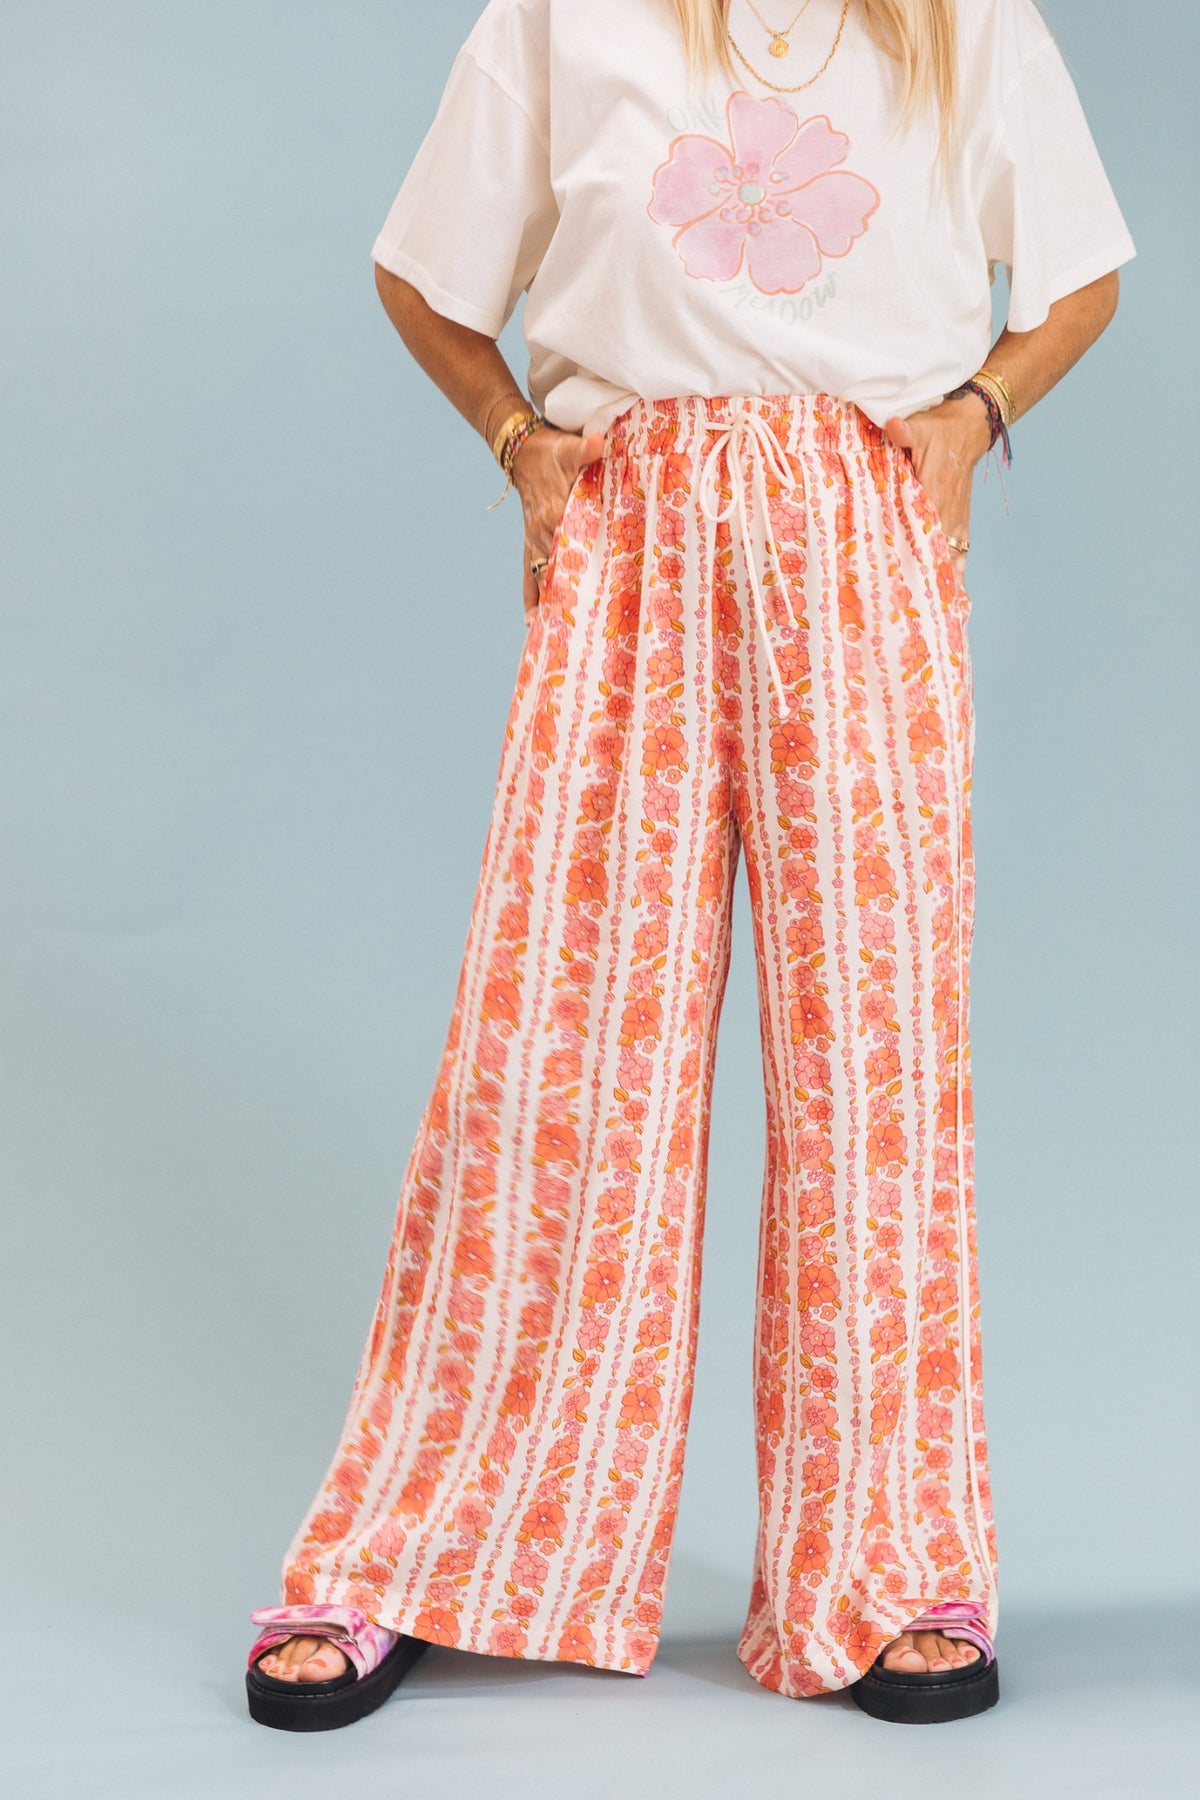 Past Style - Florence Pants in Florence Floral